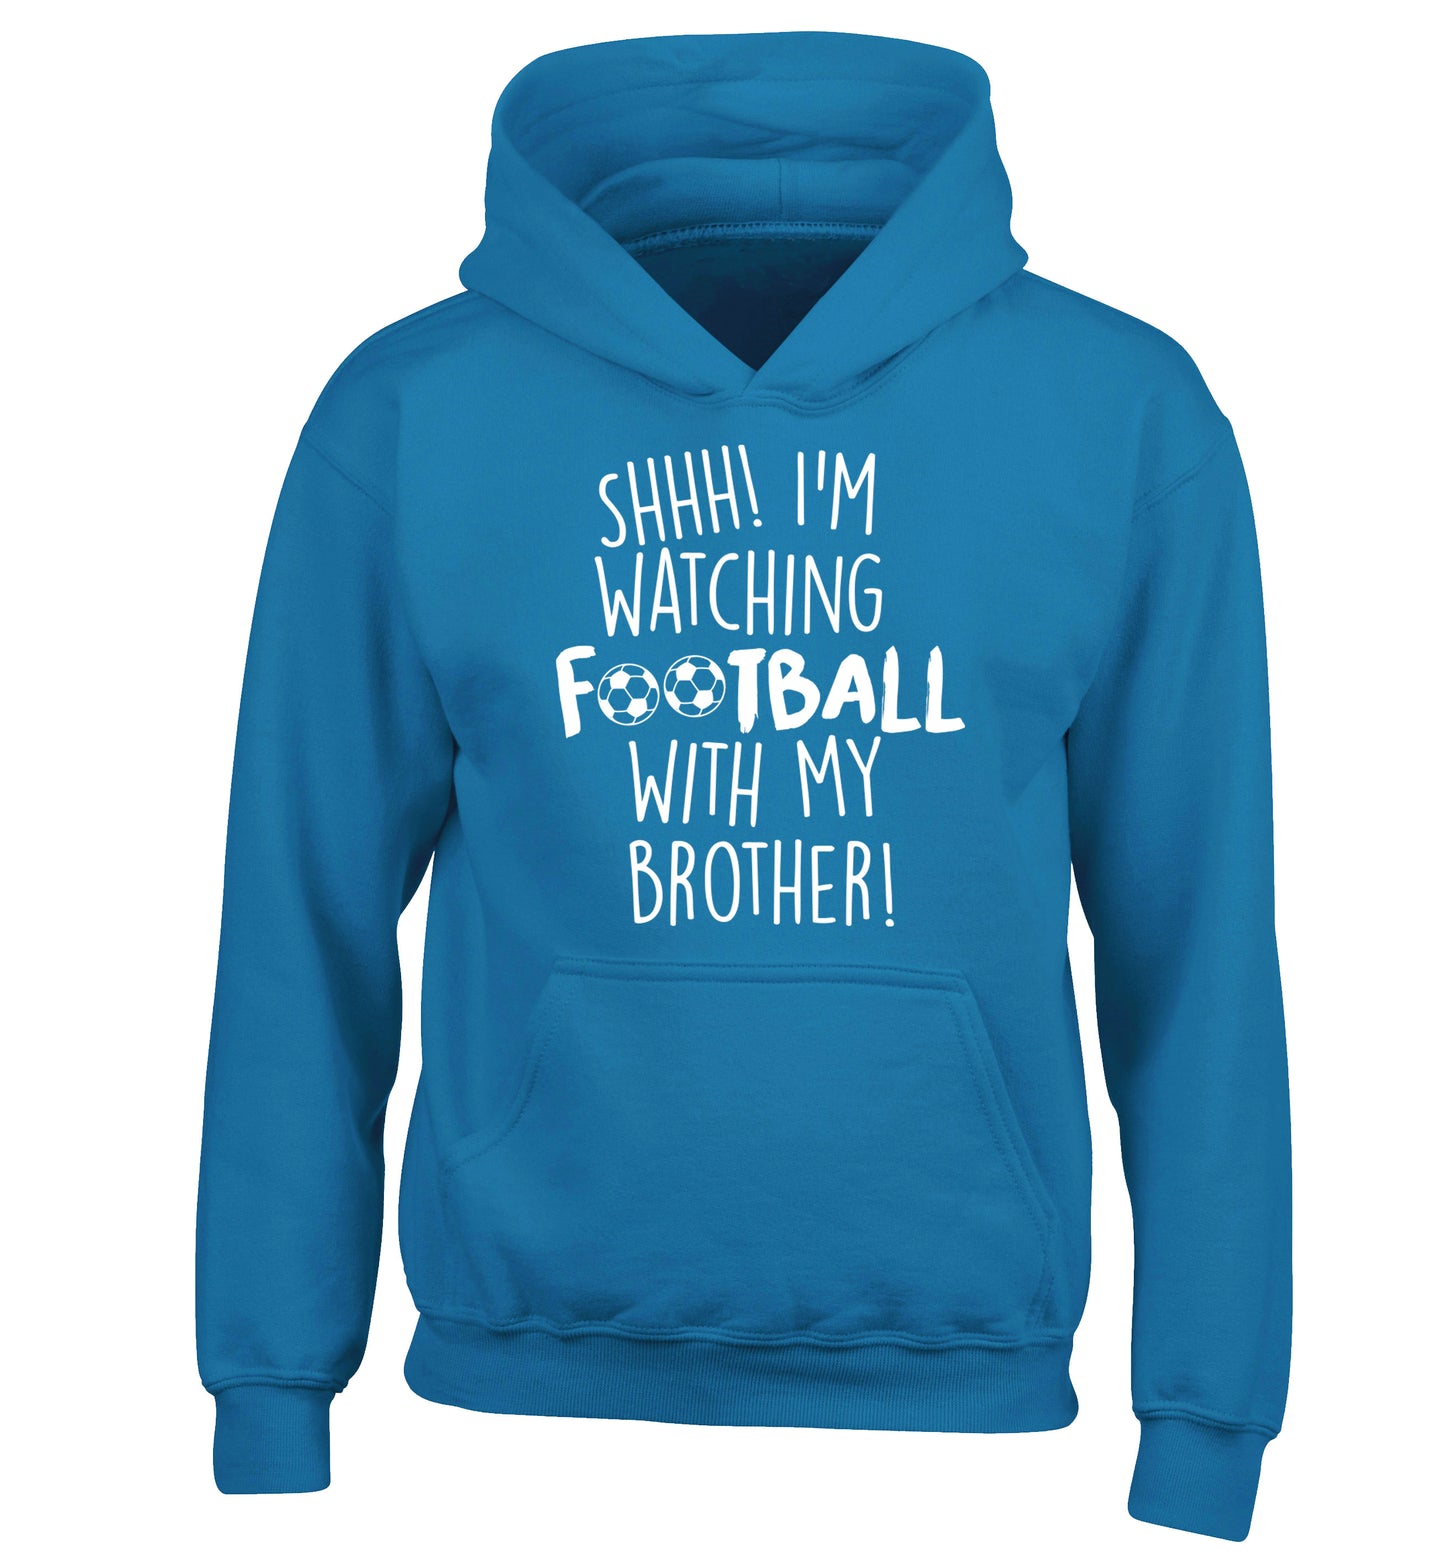 Shhh I'm watching football with my brother children's blue hoodie 12-14 Years